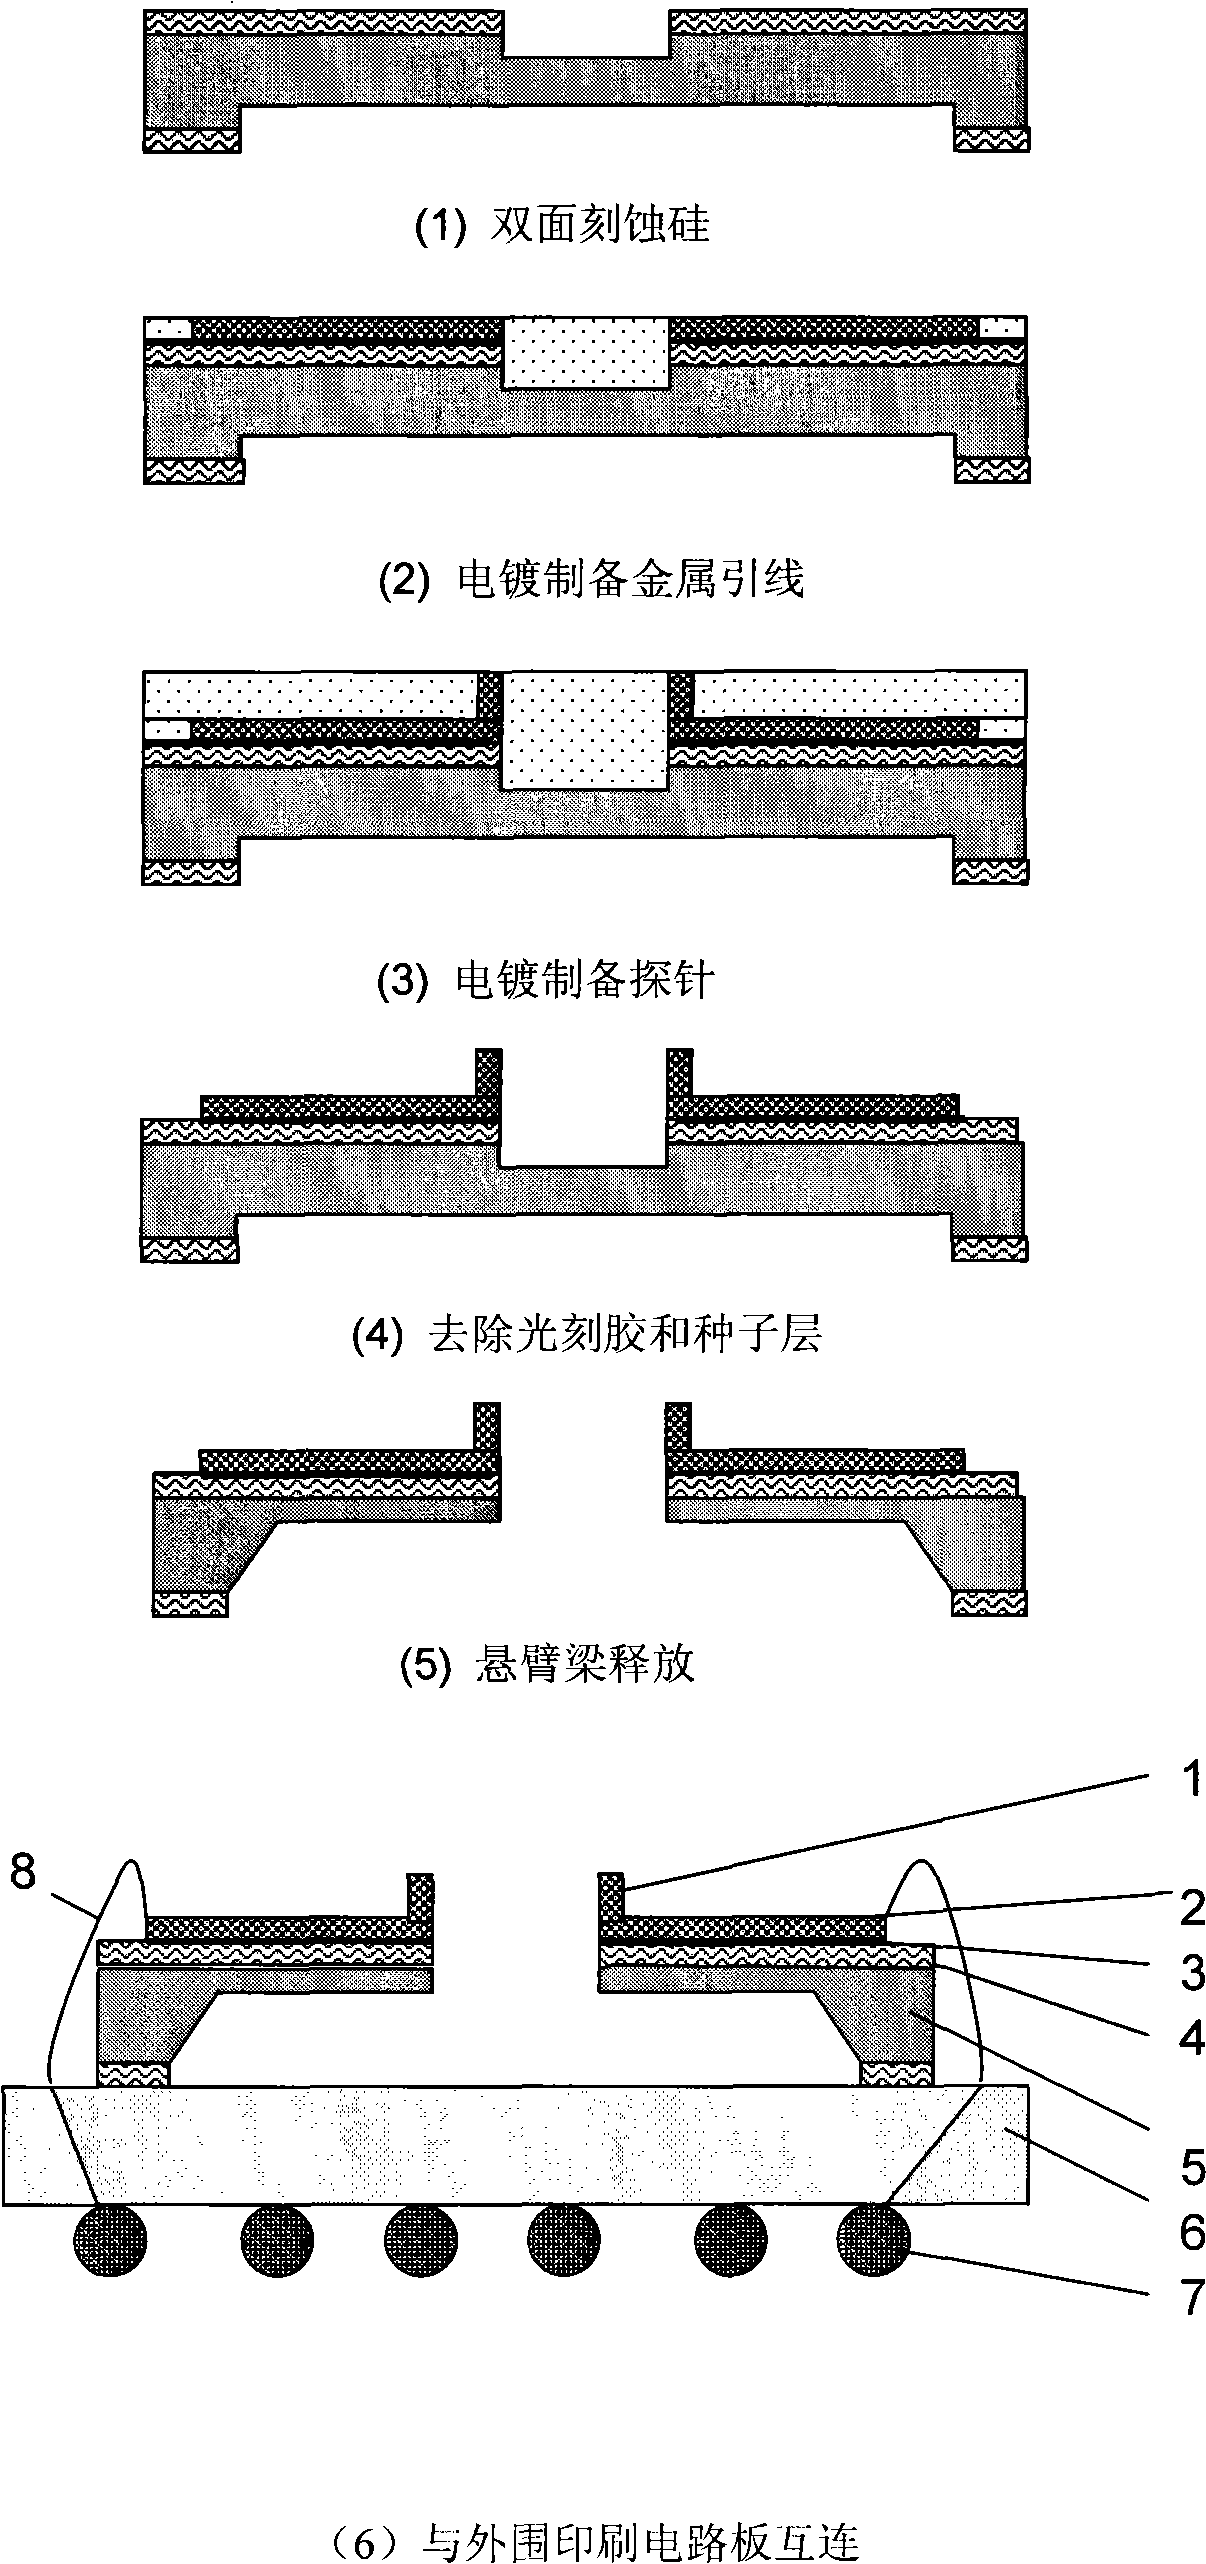 Metal-silicon compound cantilever beam type microelectronic mechanical system probe card and manufacture method thereof